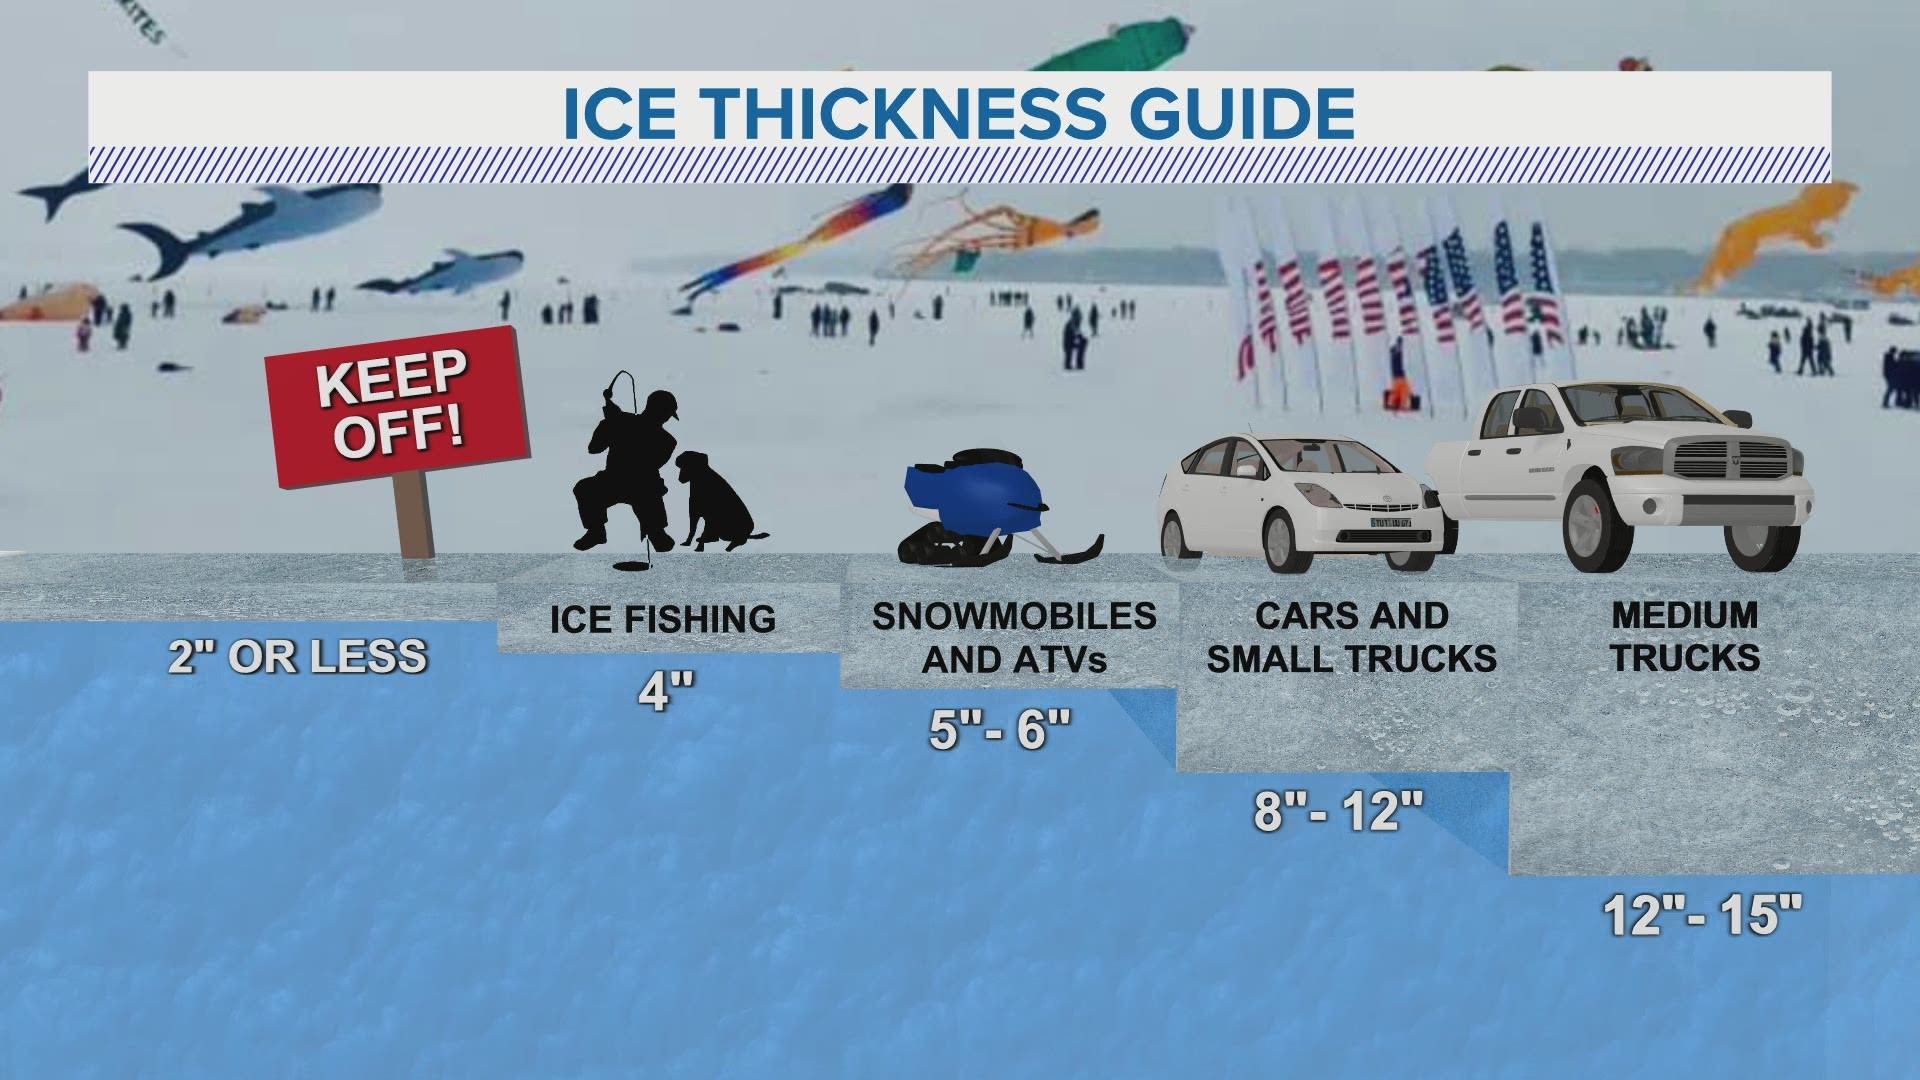 How thick should ice be for safe ice fishing?